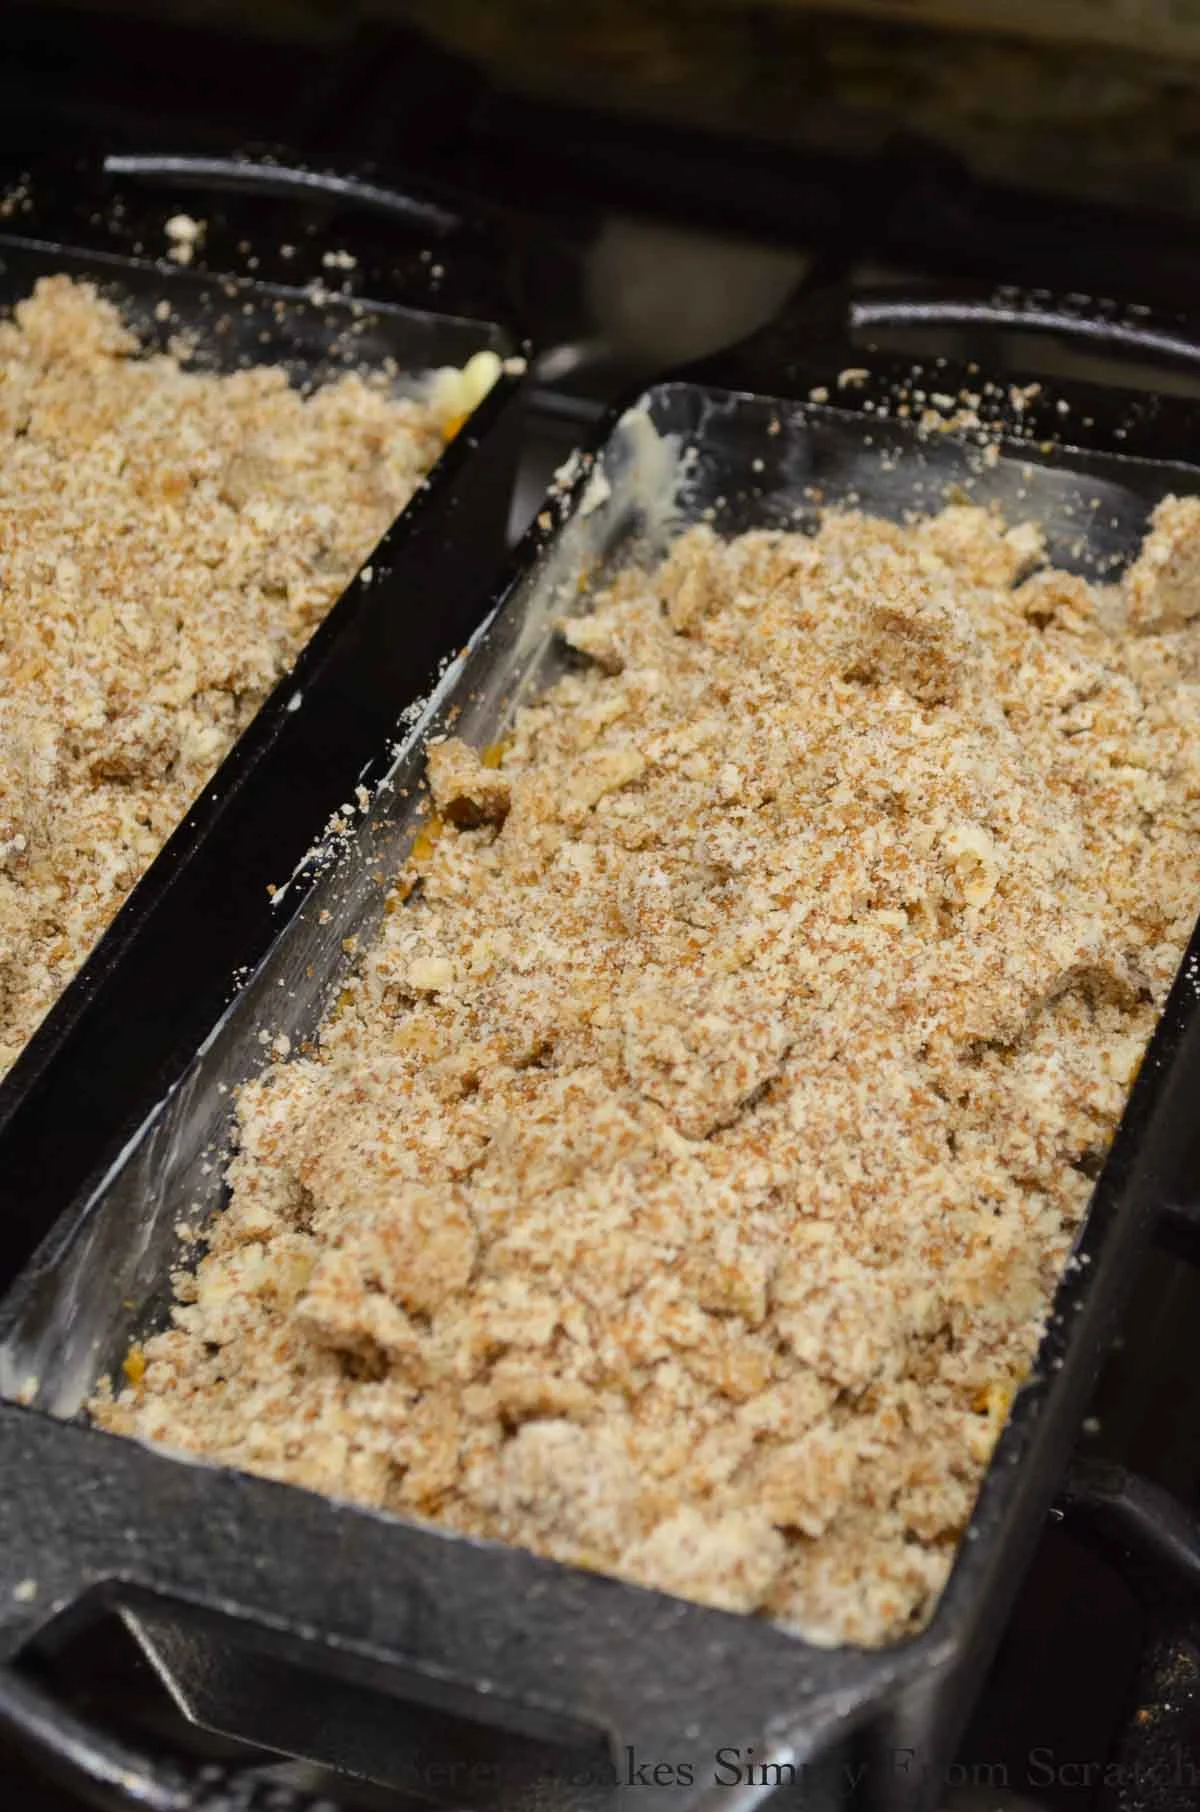 Streusel topping over the top of Pumpkin Bread batter.